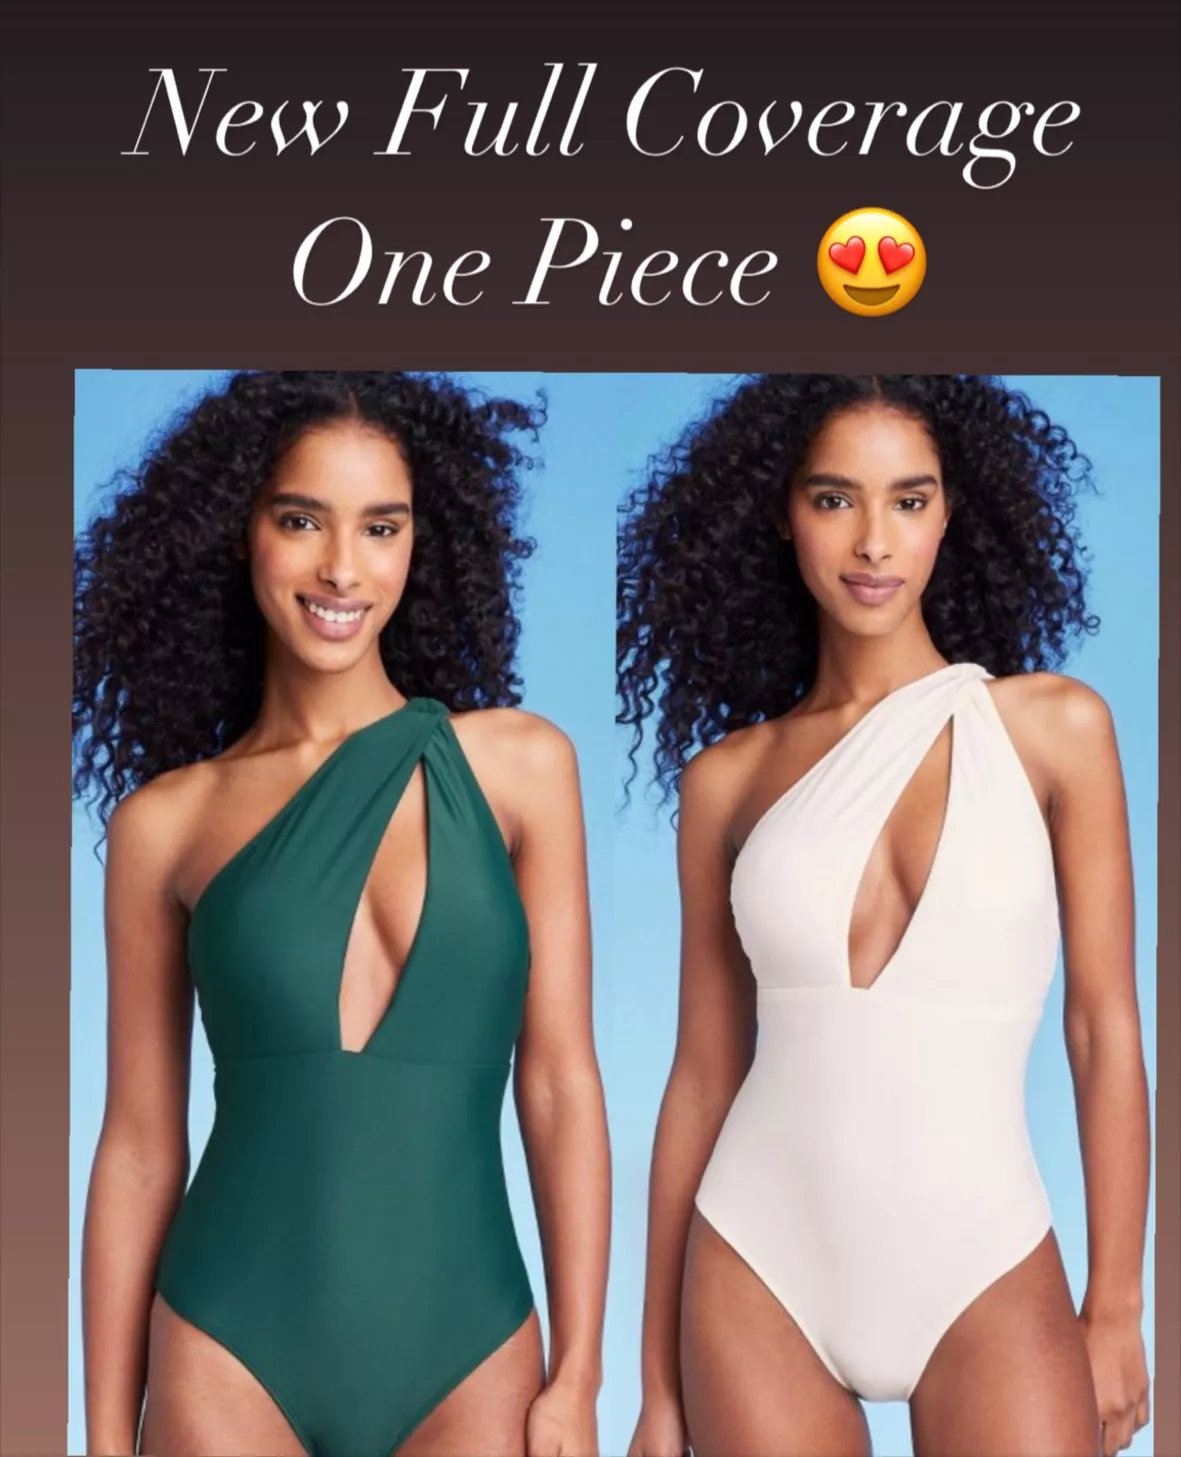 Women's One Shoulder Plunge Cut Out One Piece Swimsuit - Shade